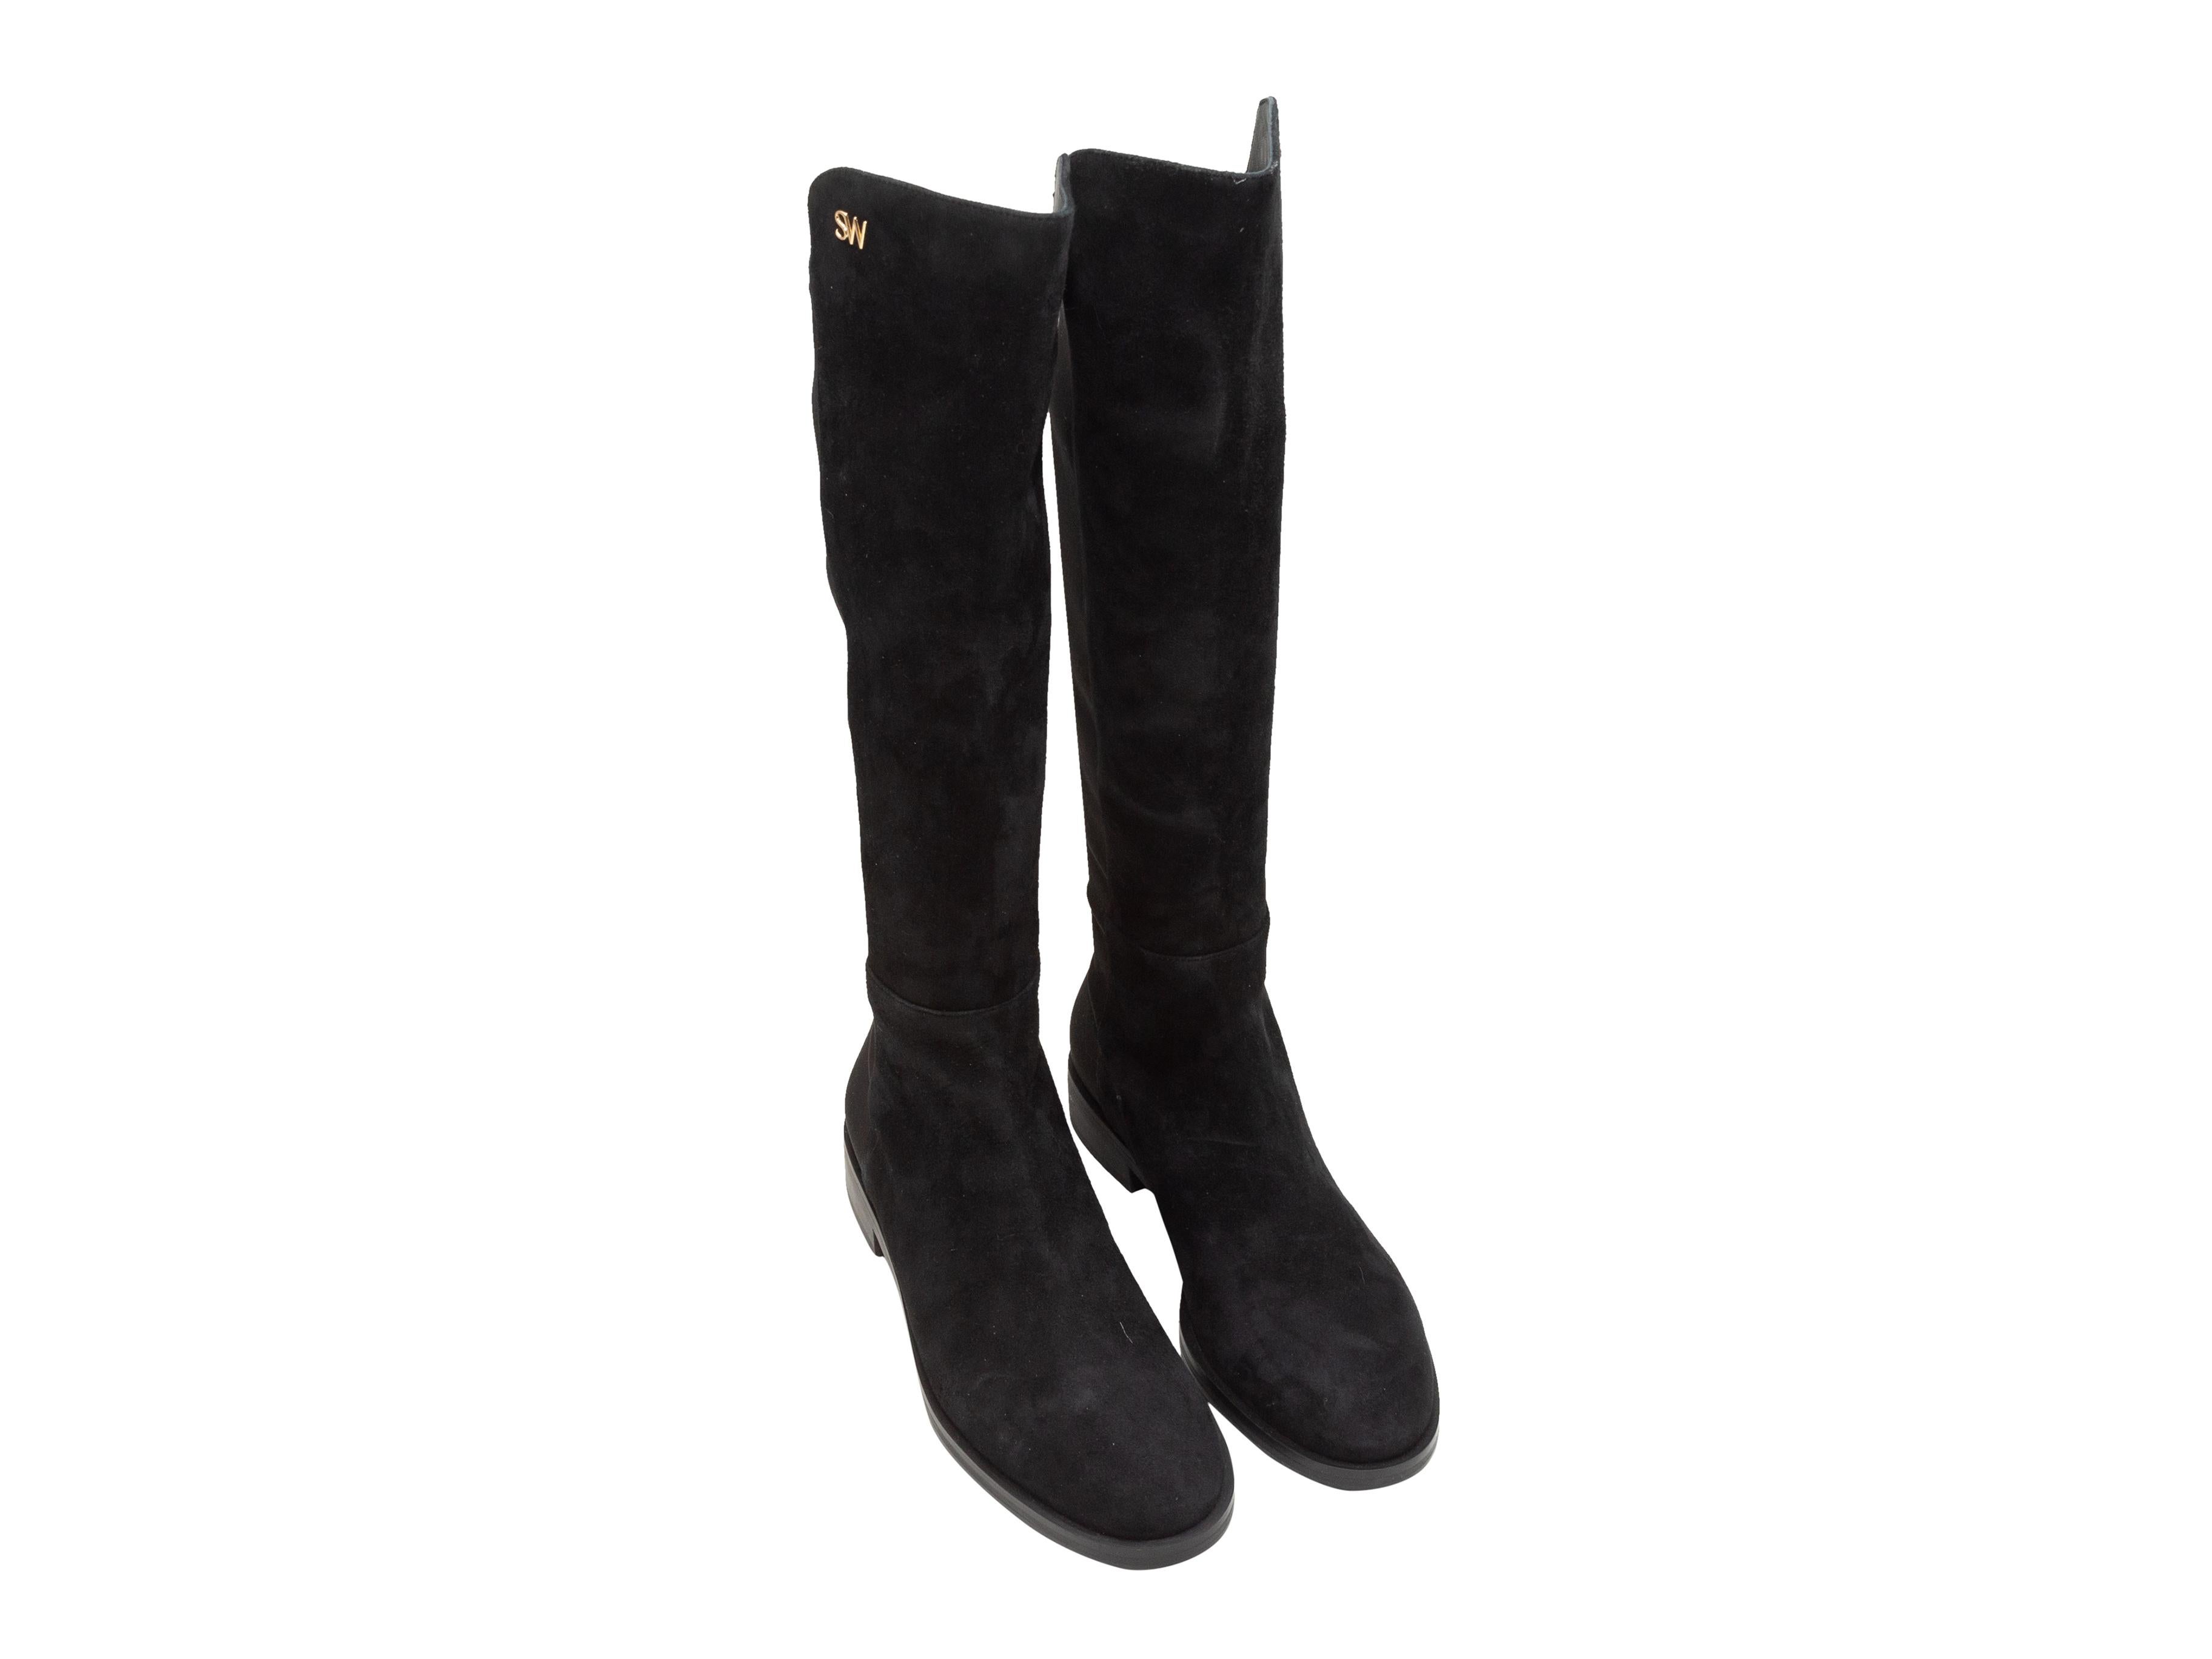 Product details: Black suede and elastic knee-high boots by Stuart Weitzman. Stacked heels. 1